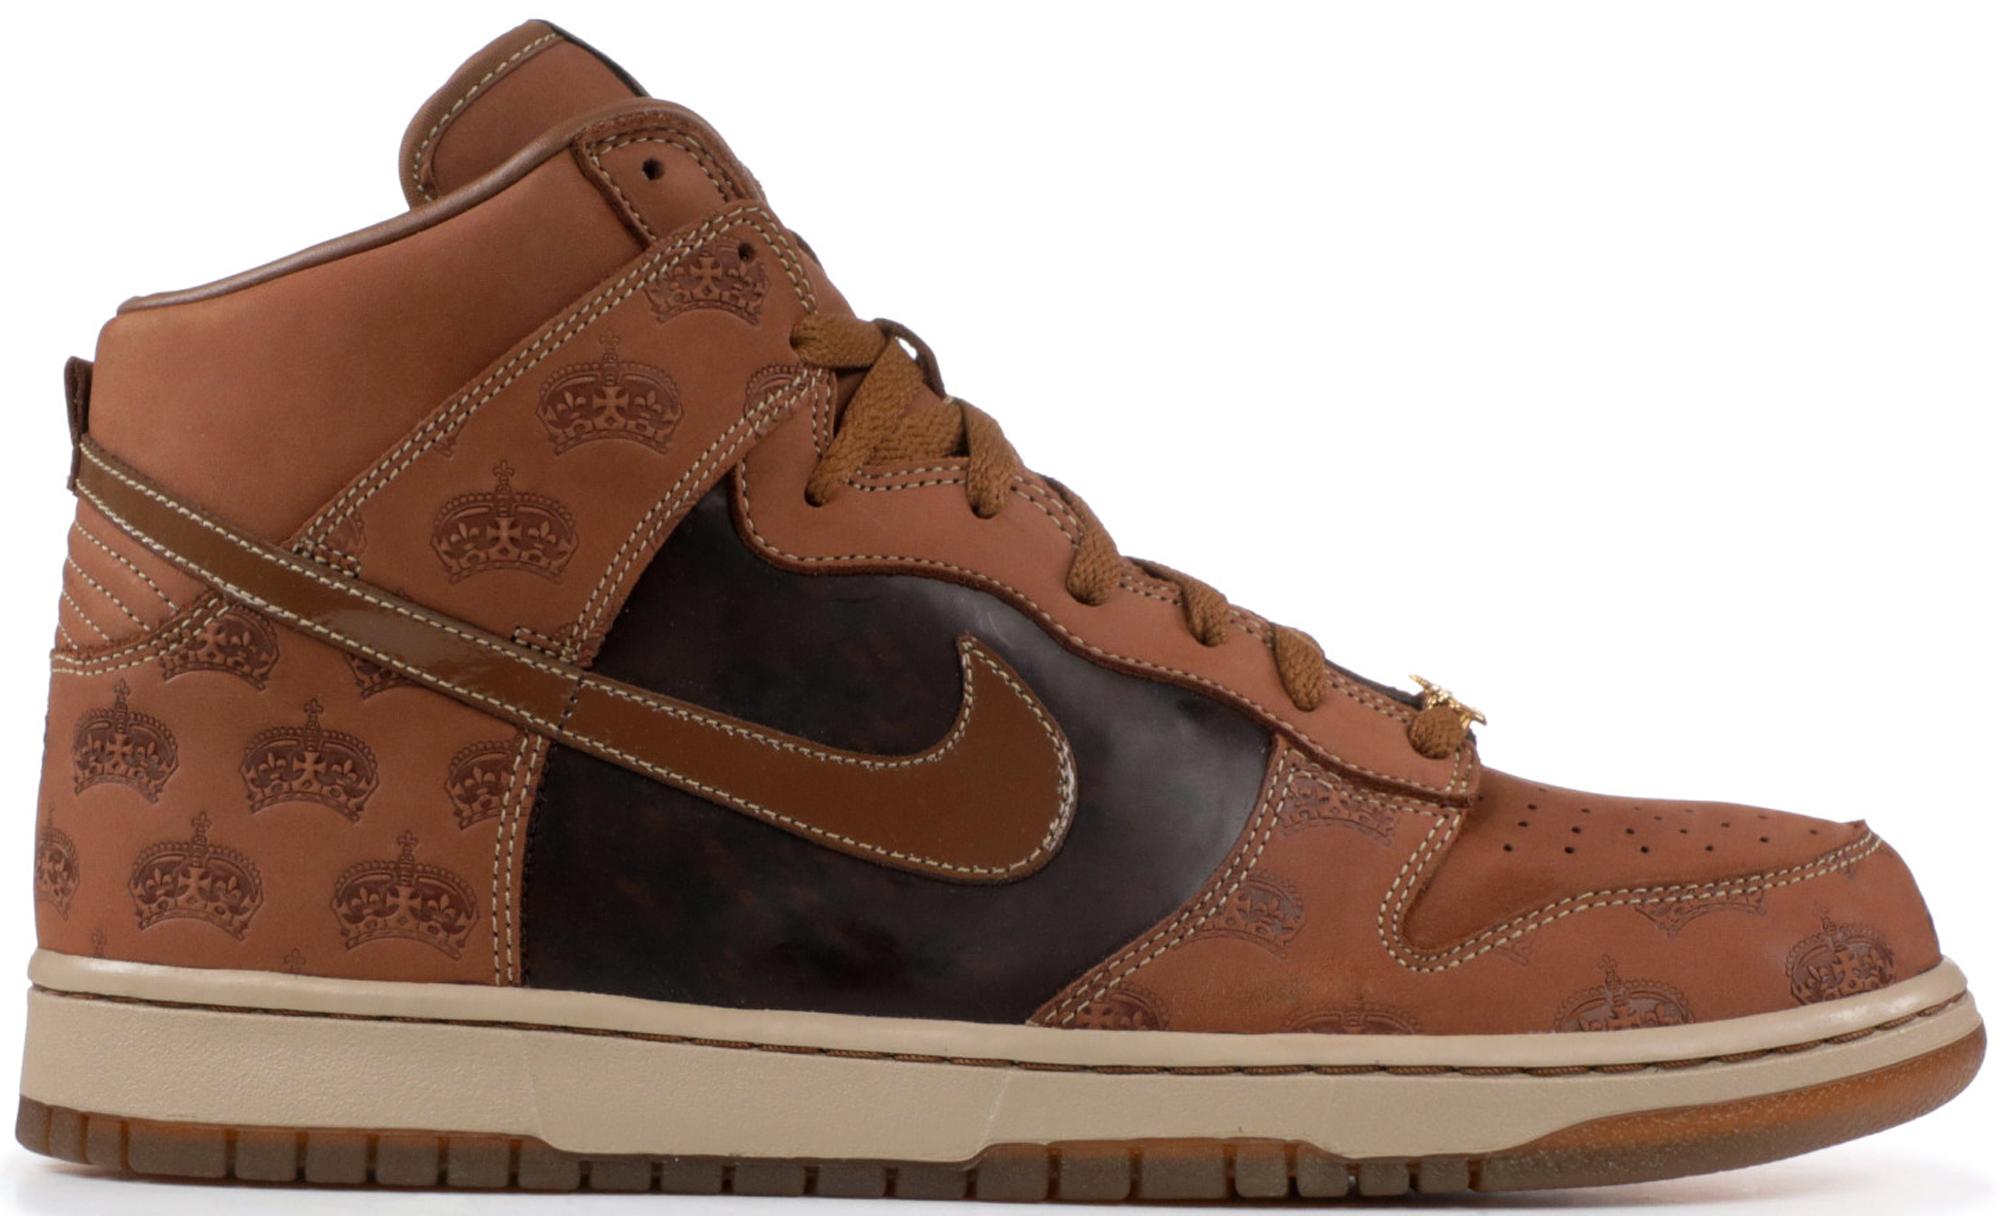 Nike Dunk High Mighty Crown Bison in Brown for Men - Save 27% - Lyst